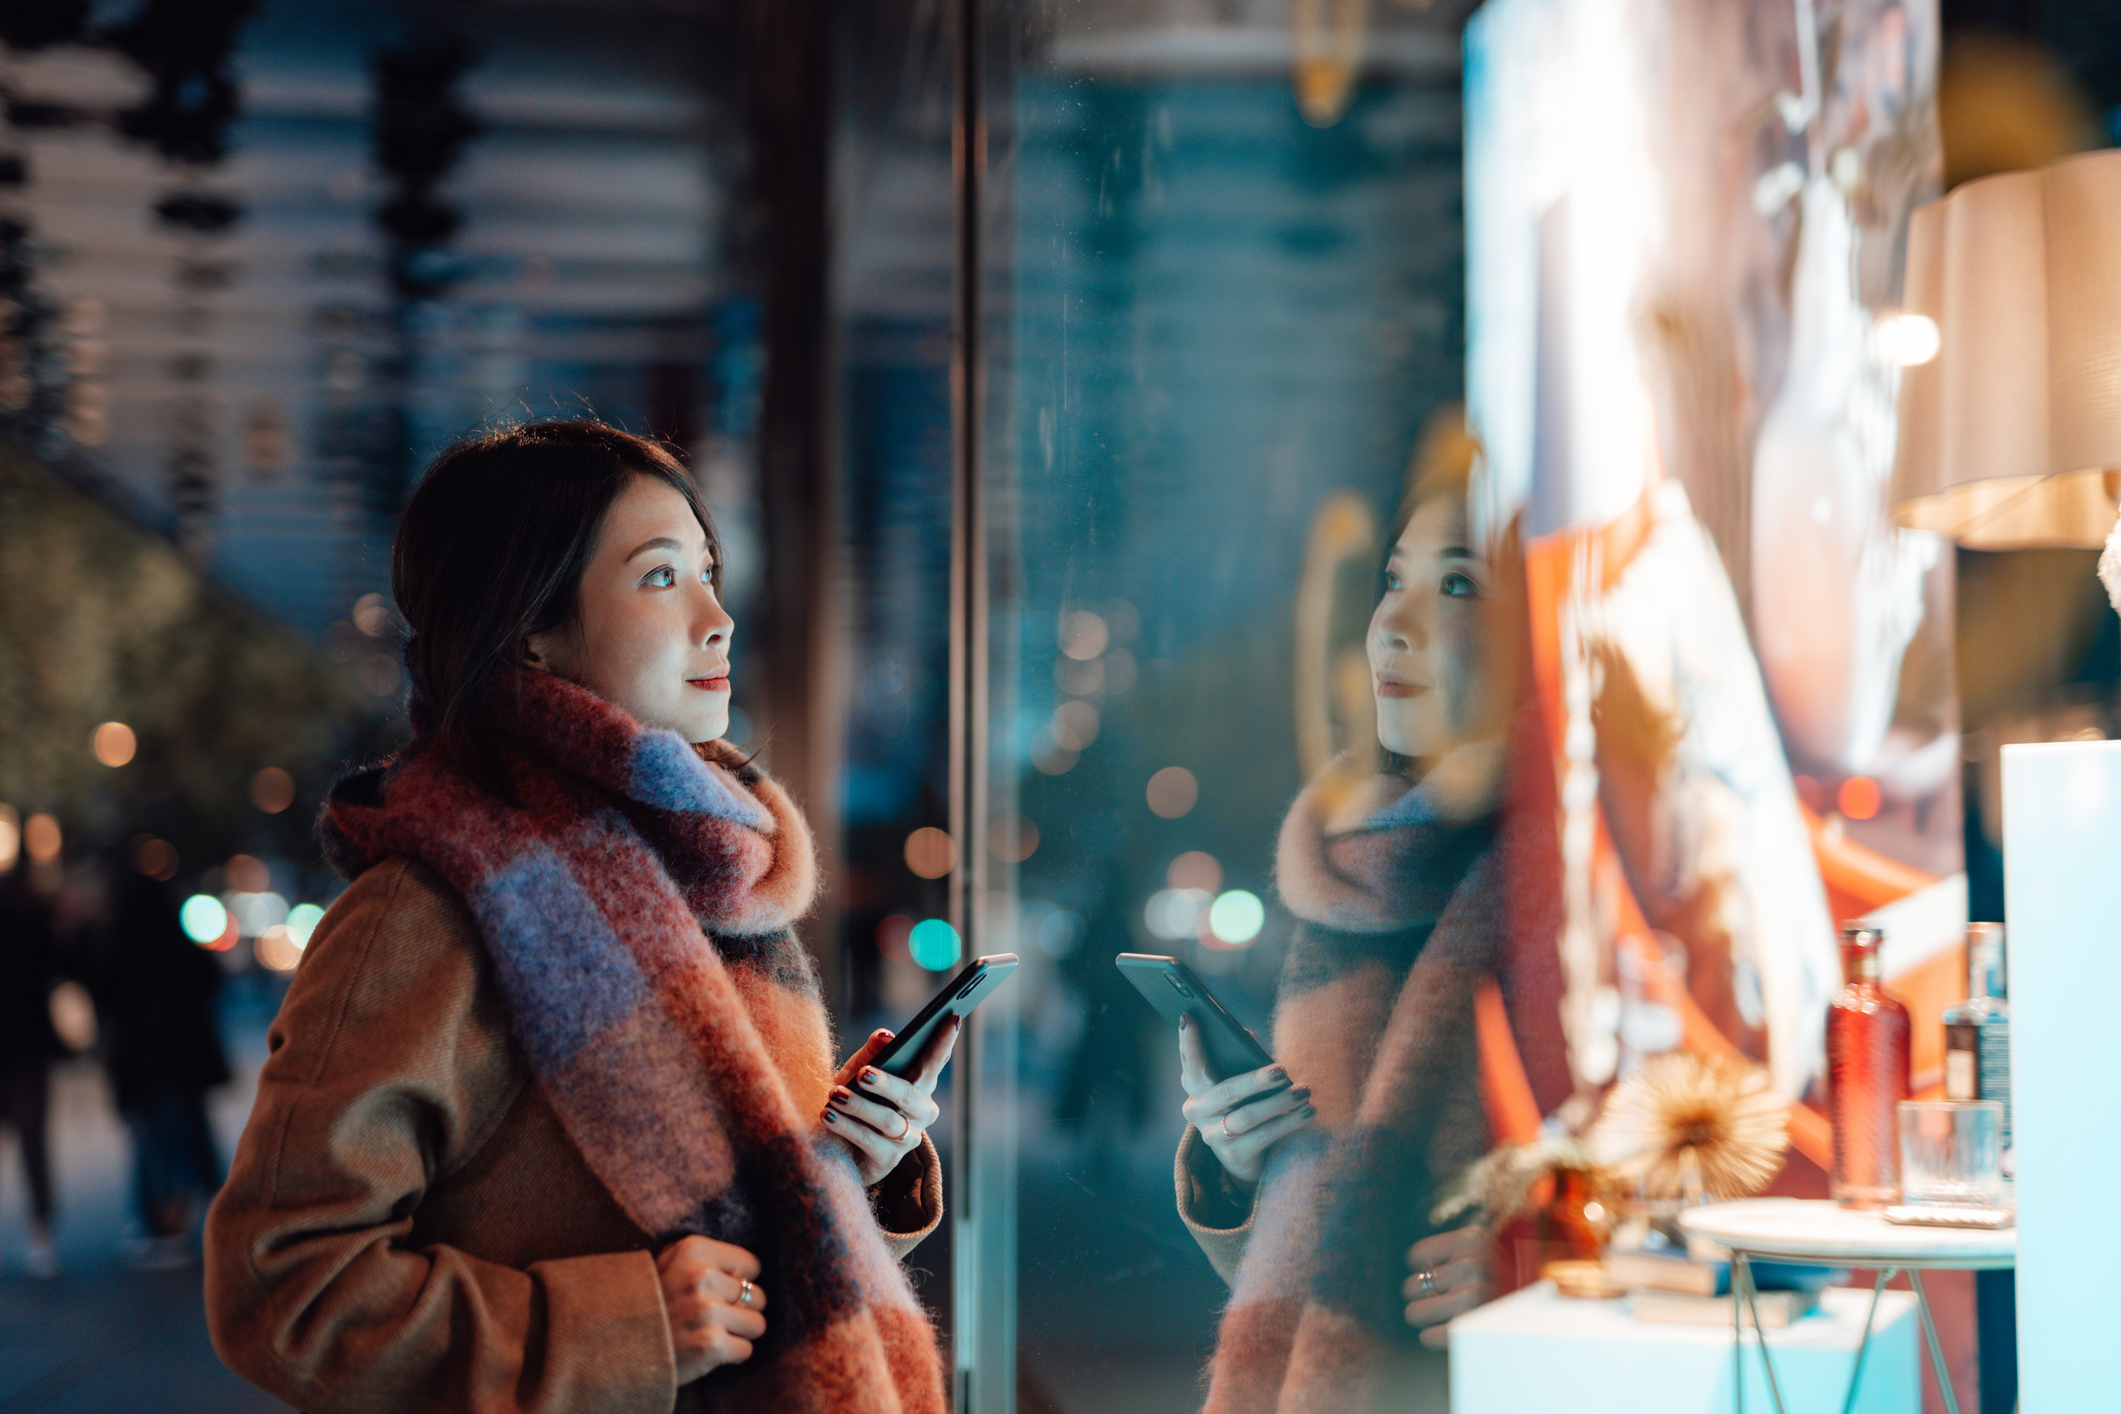 Woman gazing at a window display, wearing a warm scarf, holding a smartphone